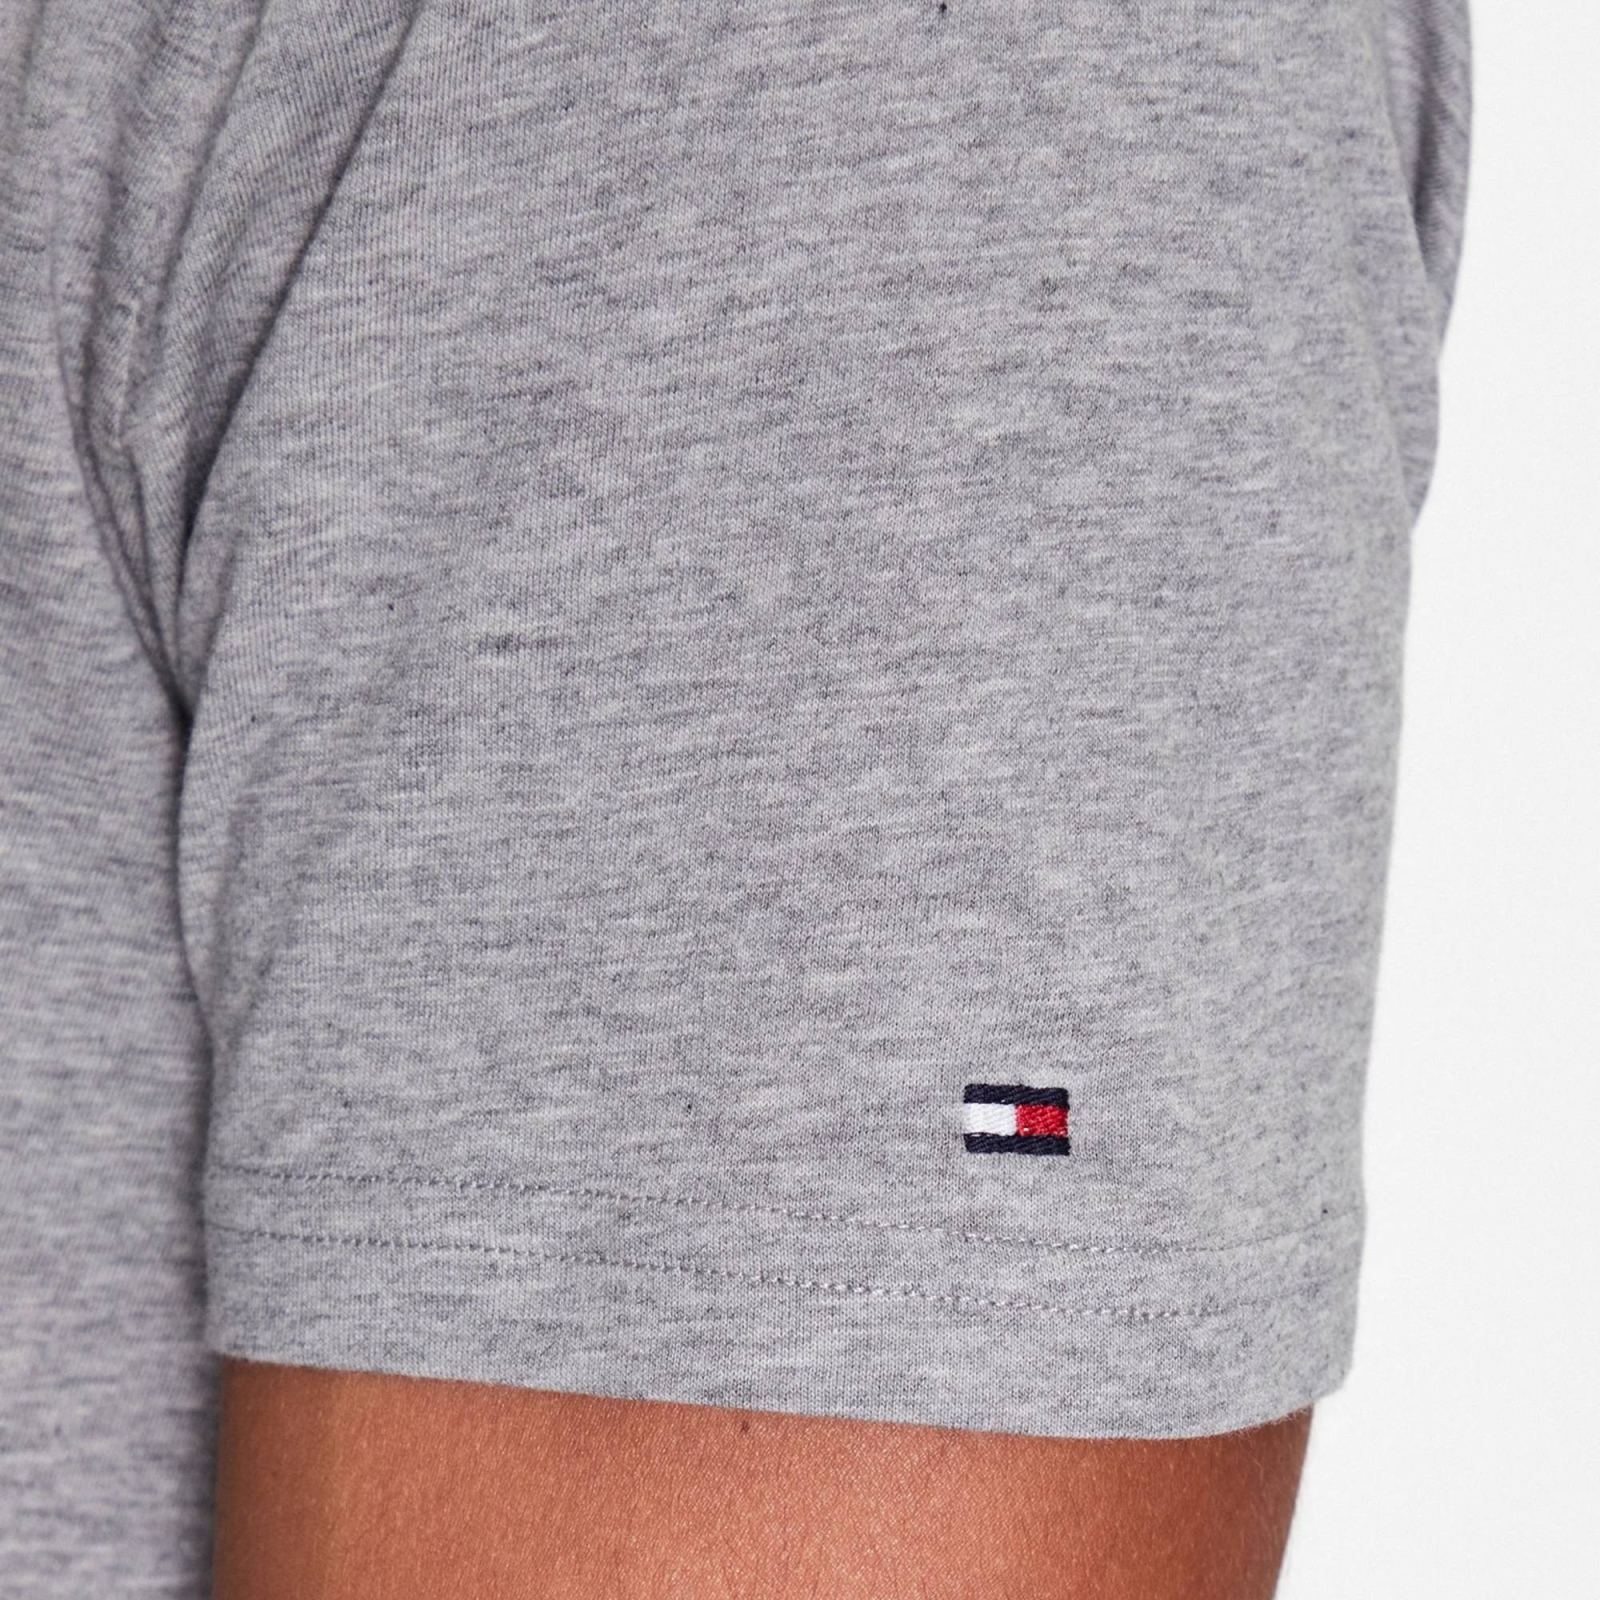 TOMMY TEE LOGO